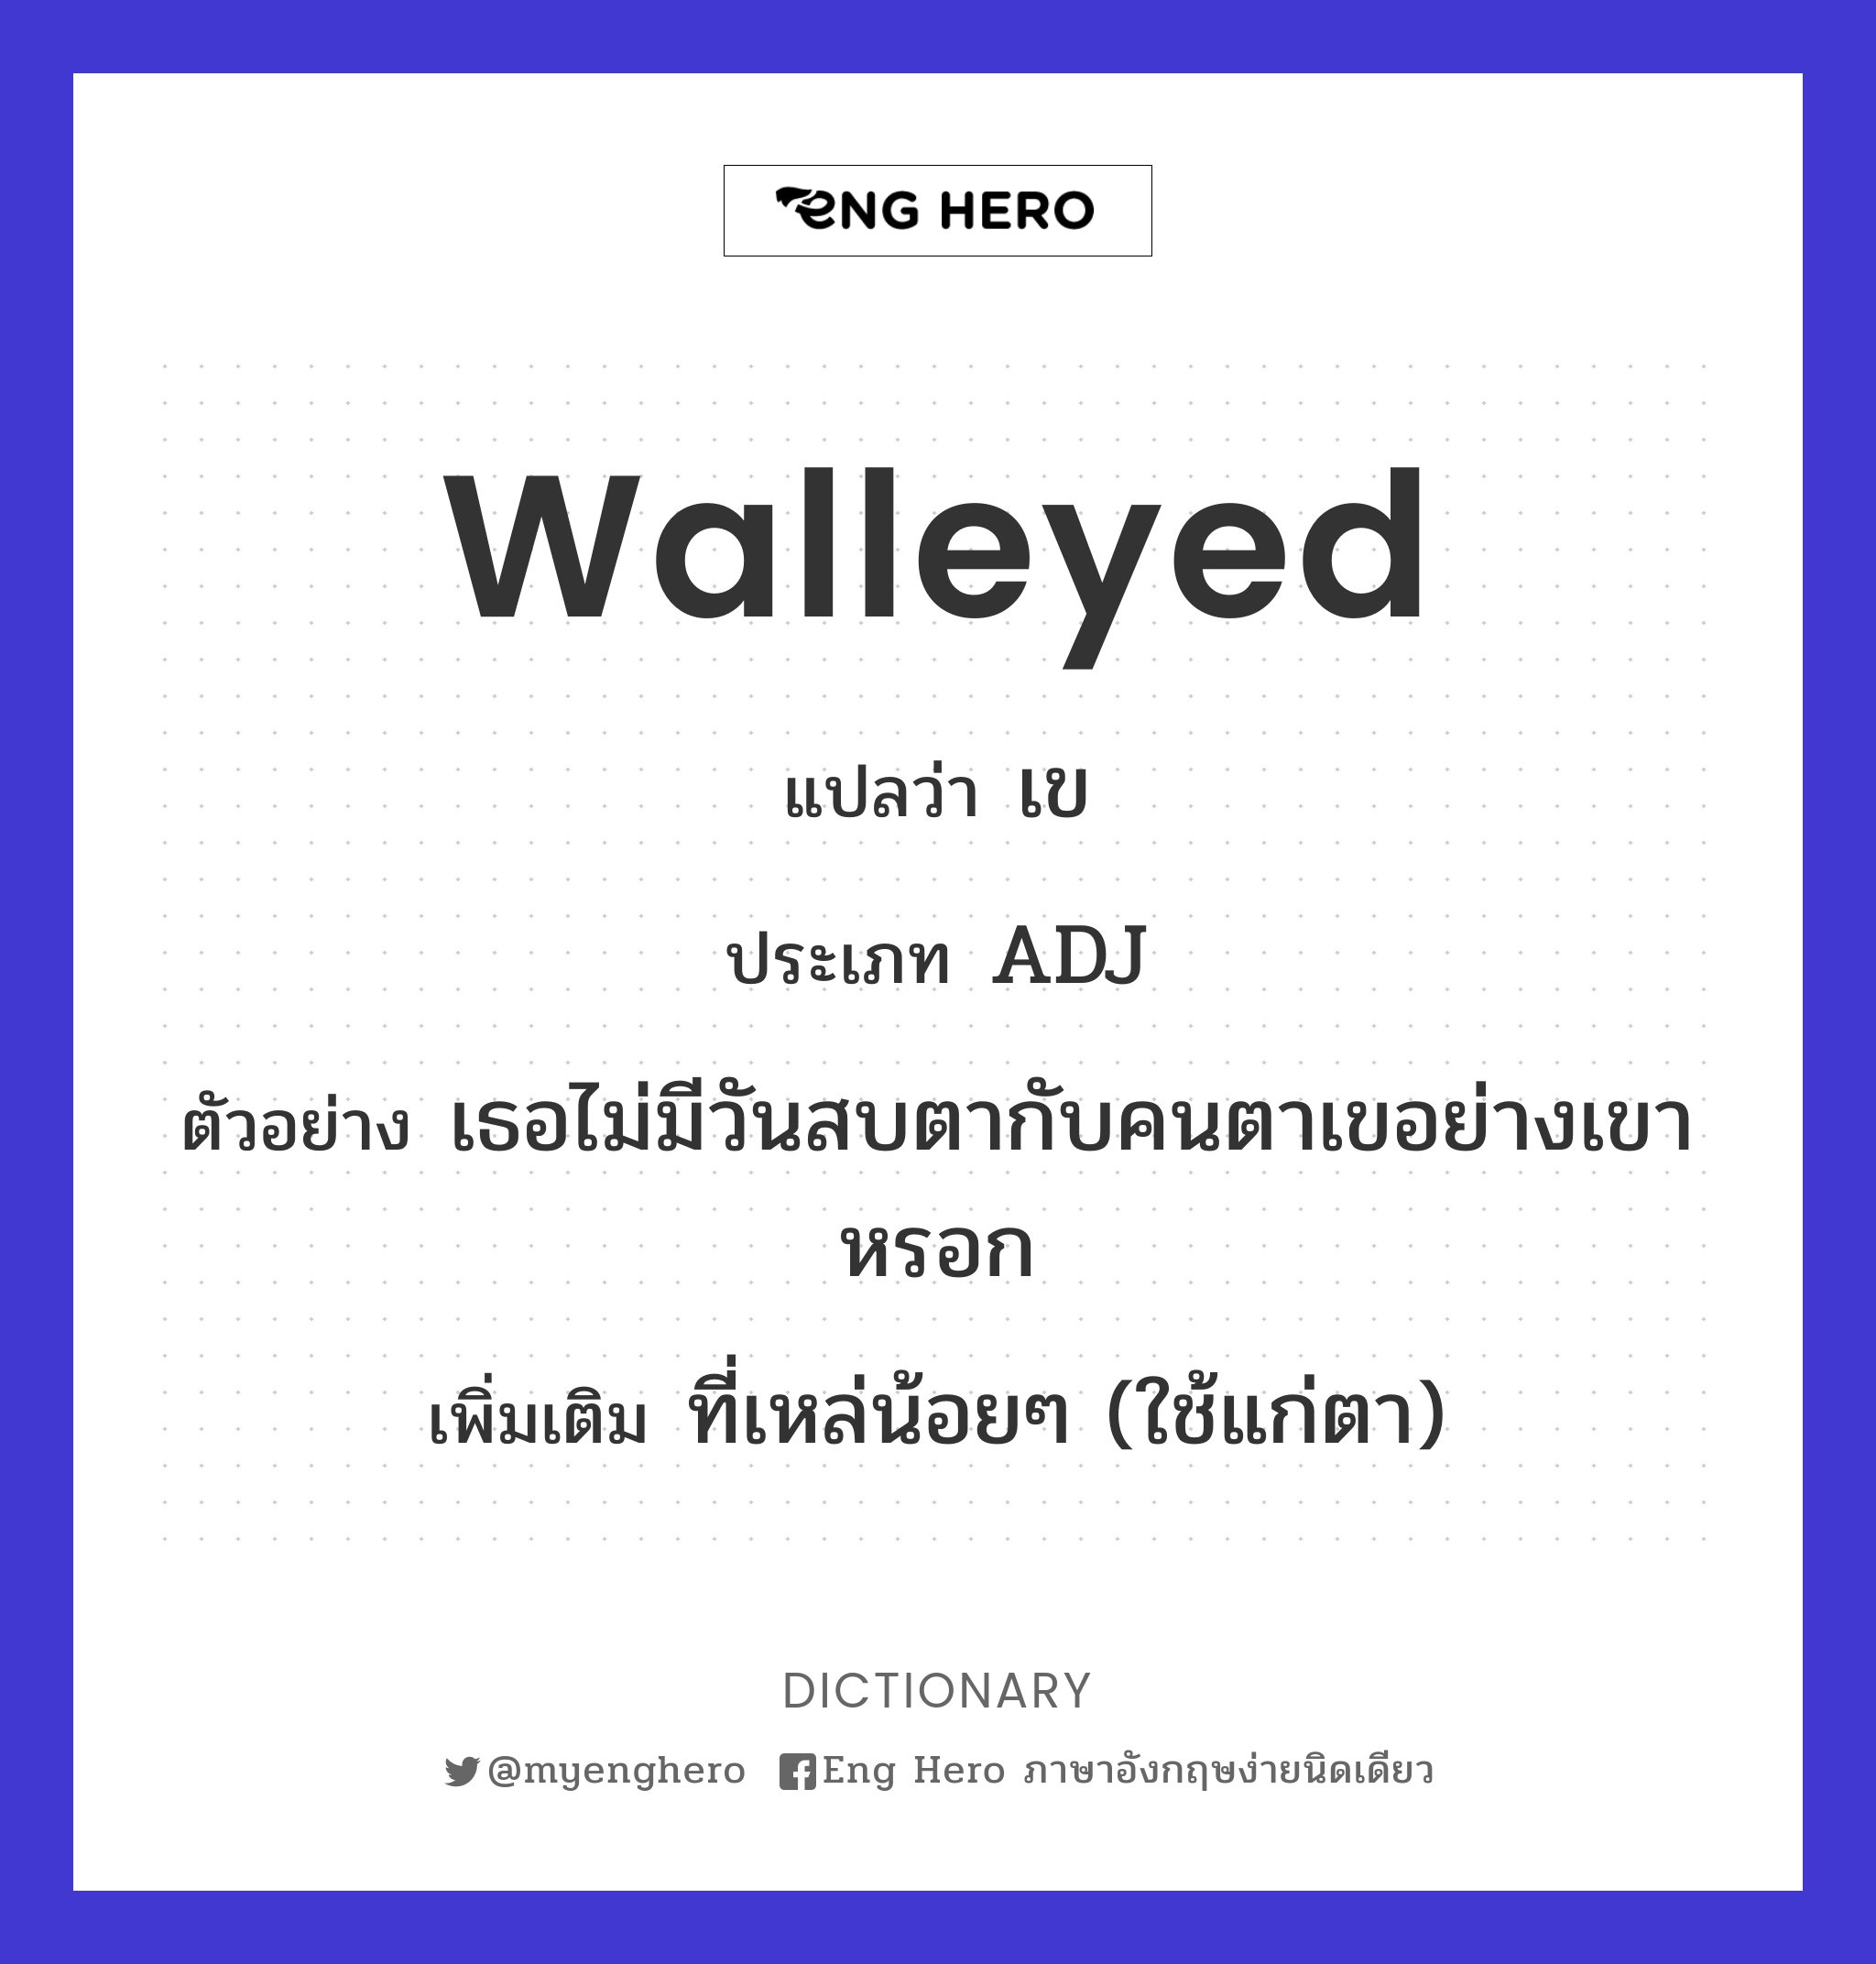 walleyed